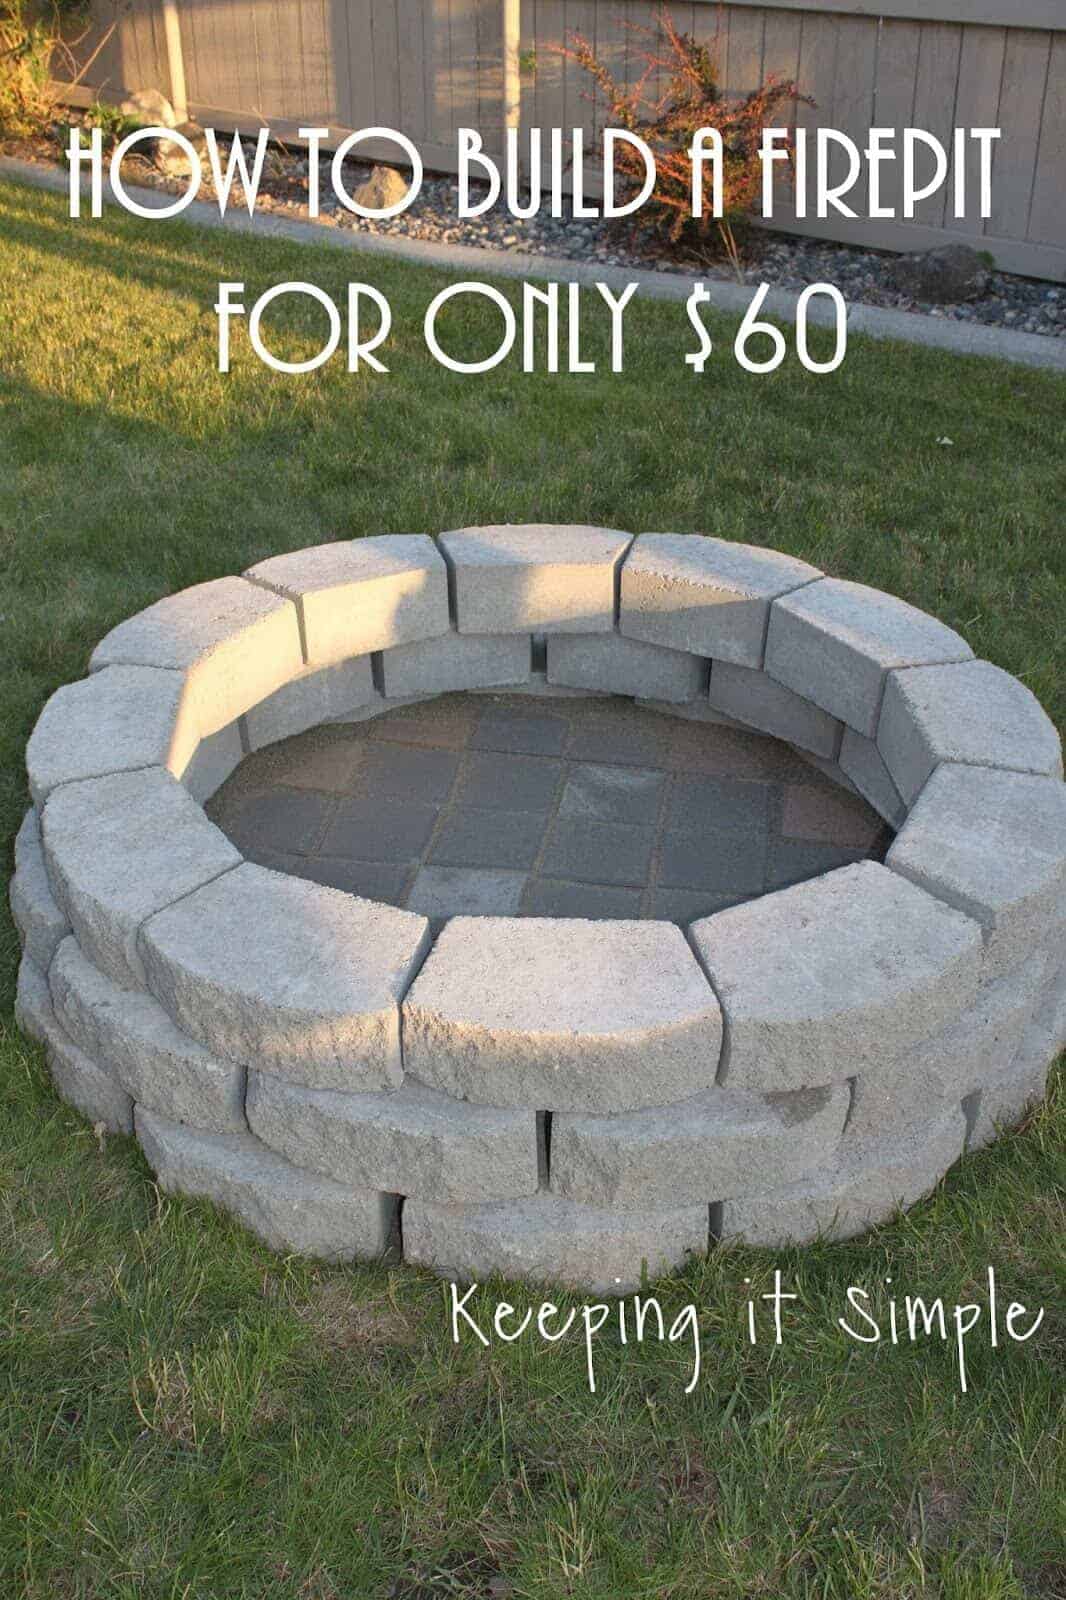 How to Build a Fire Pit by Keeping It Simple Crafts | Budget Backyard Project Ideas